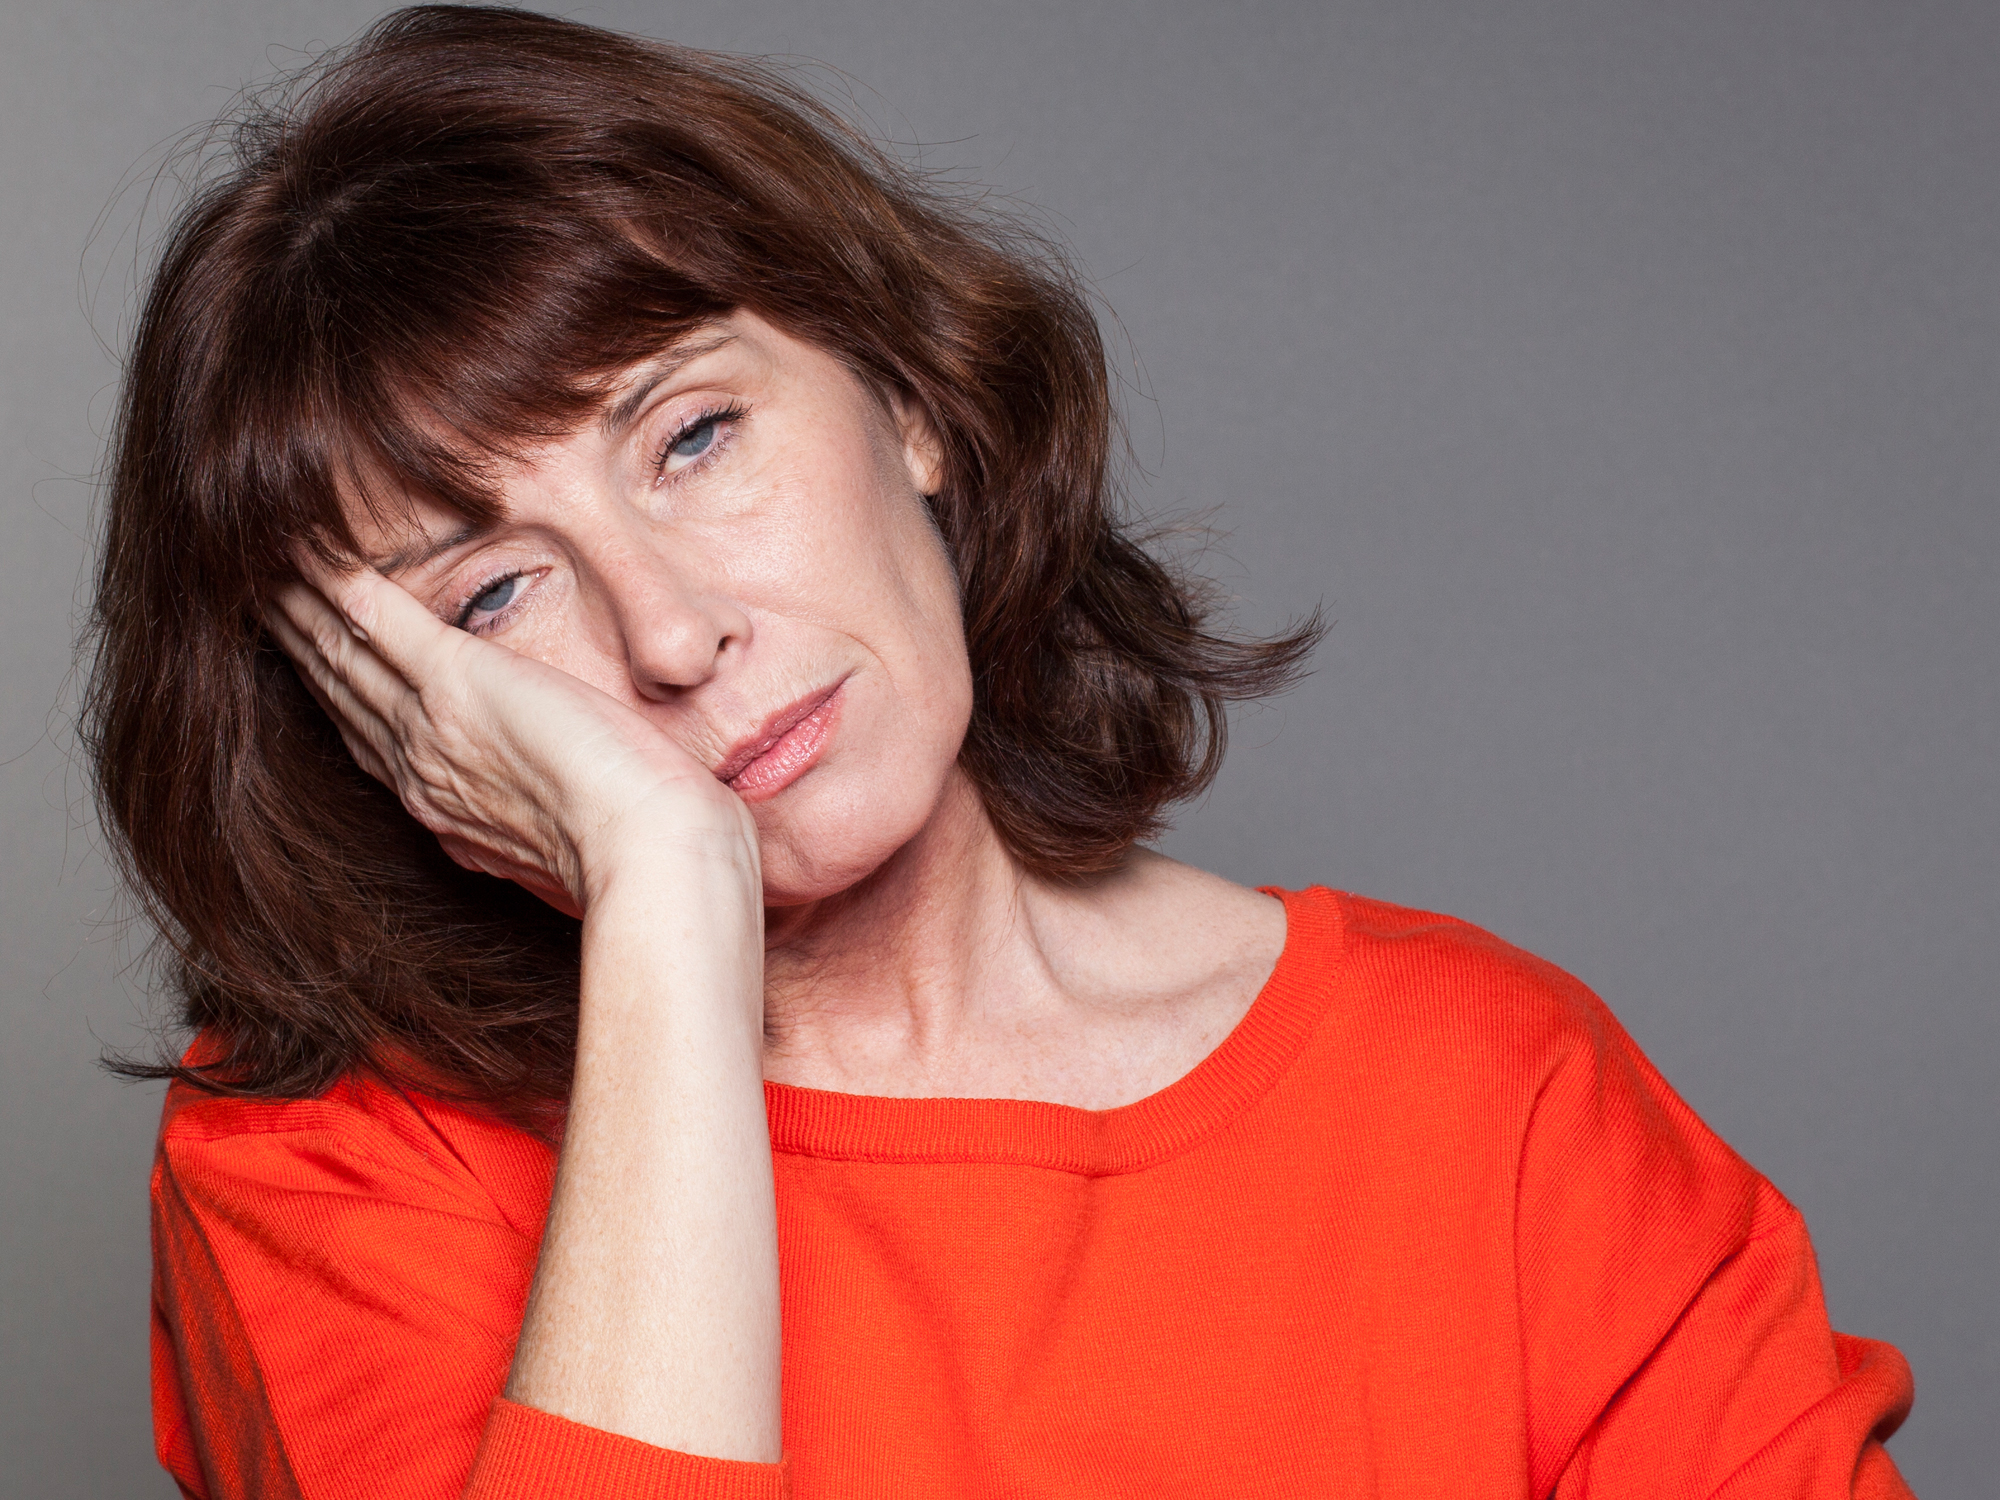 What you should know about menopause ‘brain fog’